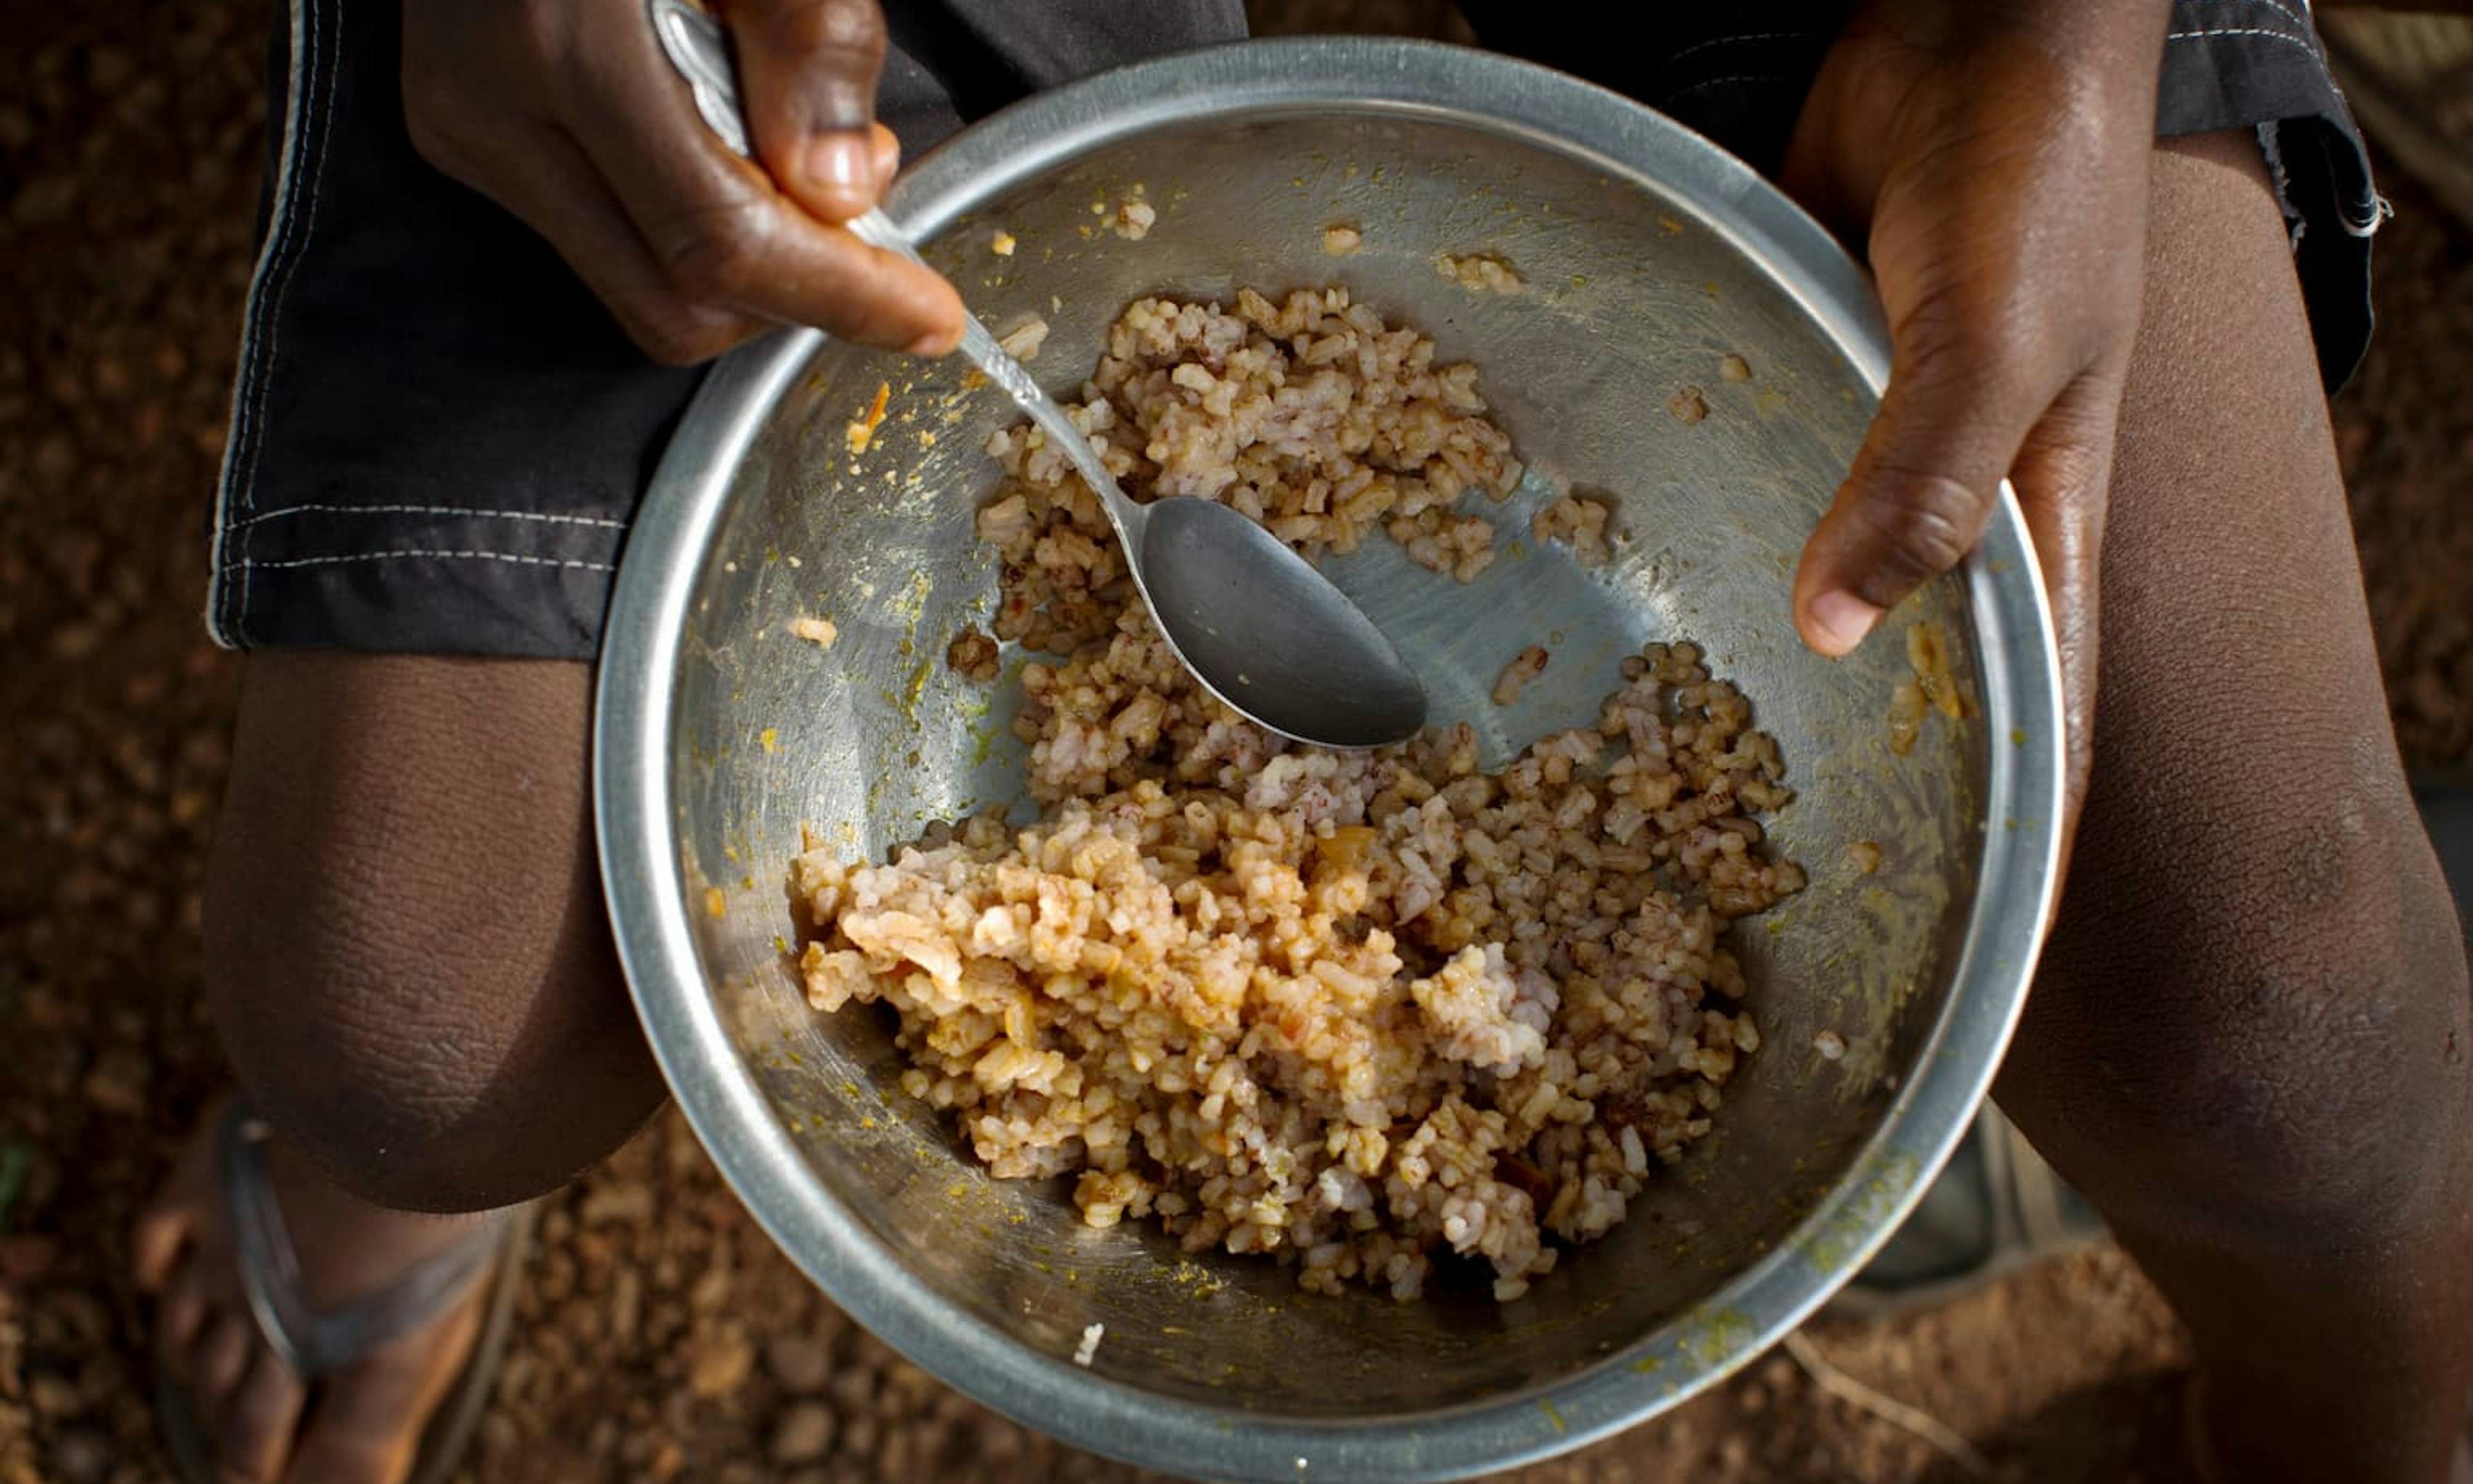 A young boy eats a bowl of rice as his only meal that day at a home near Kenema, Sierra Leone